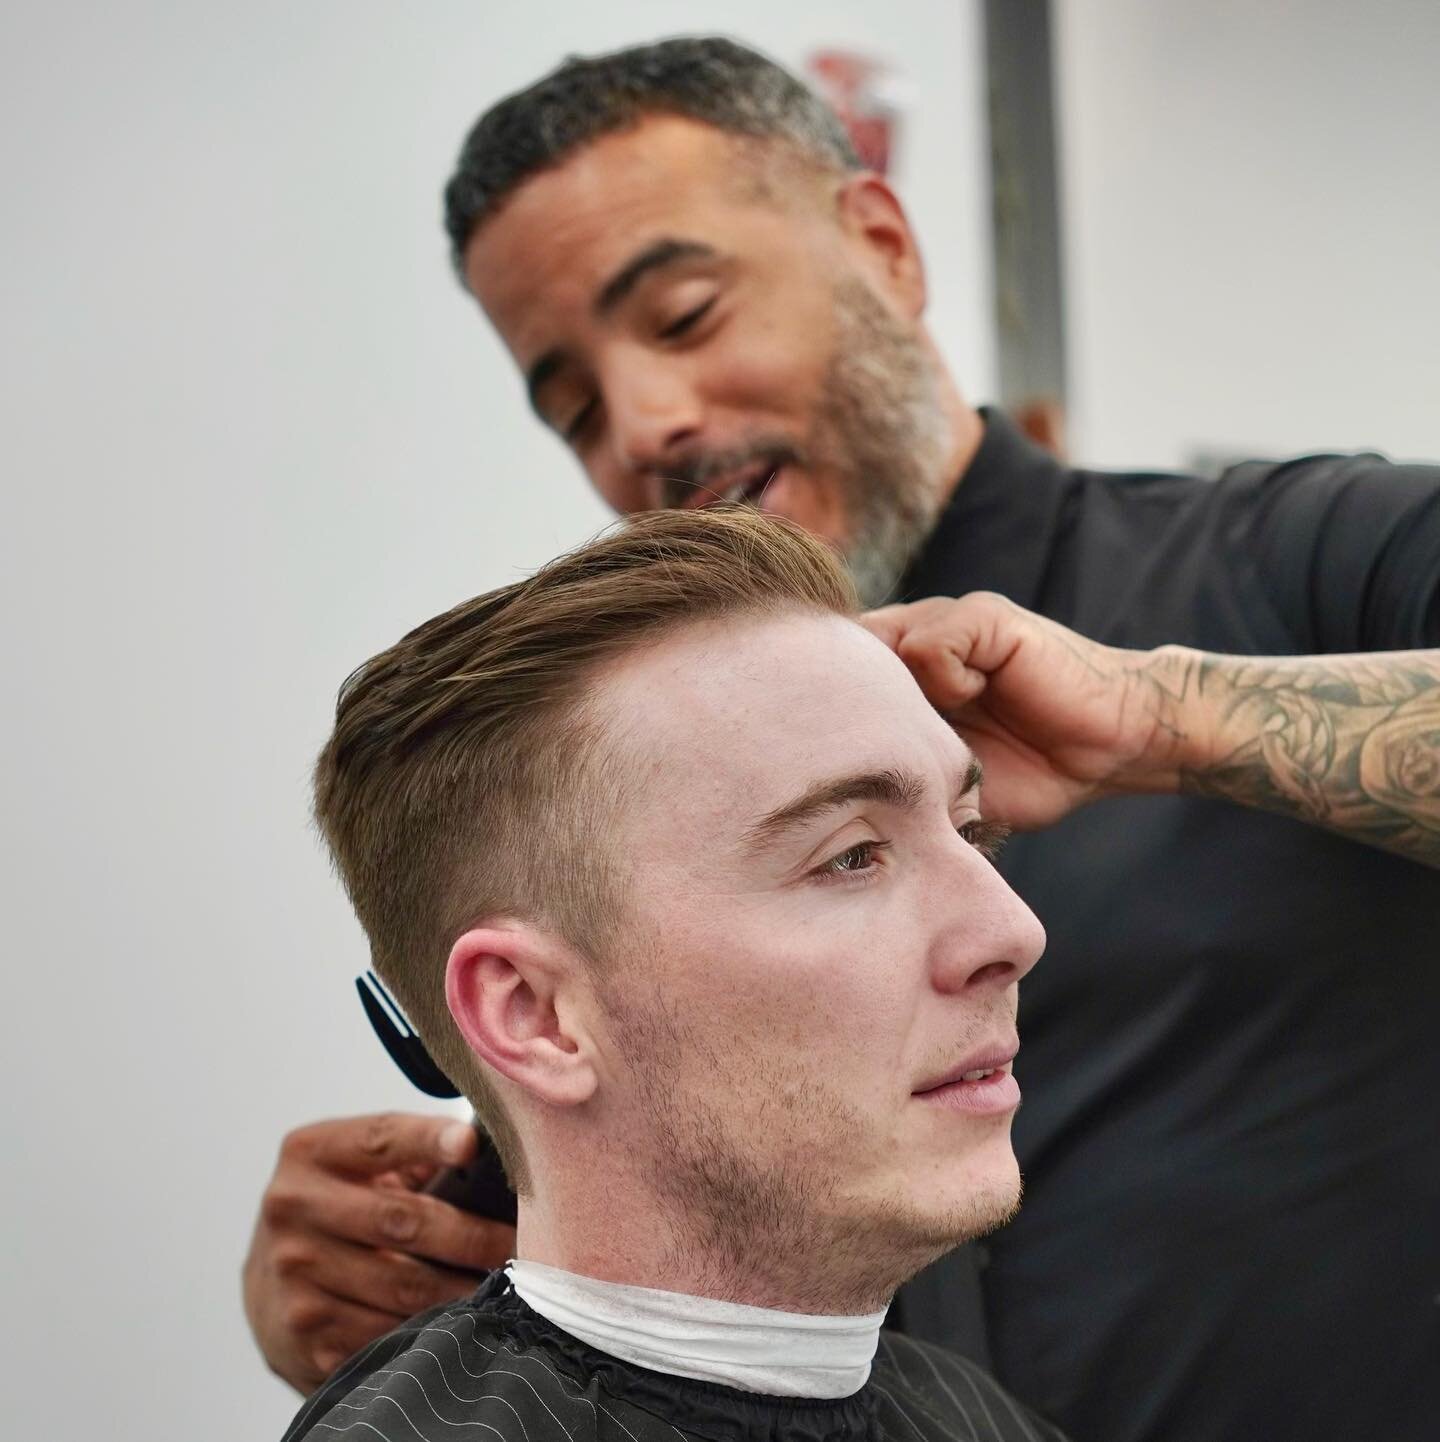 Being a barber isn&rsquo;t all about cutting ✂️ Read below ⬇️: 
.
🗣️Socializing with our clients is something we take pride in. We connect, laugh, learn something new and sometimes vent to one another about life. Do you talk to your barber ? Let us 